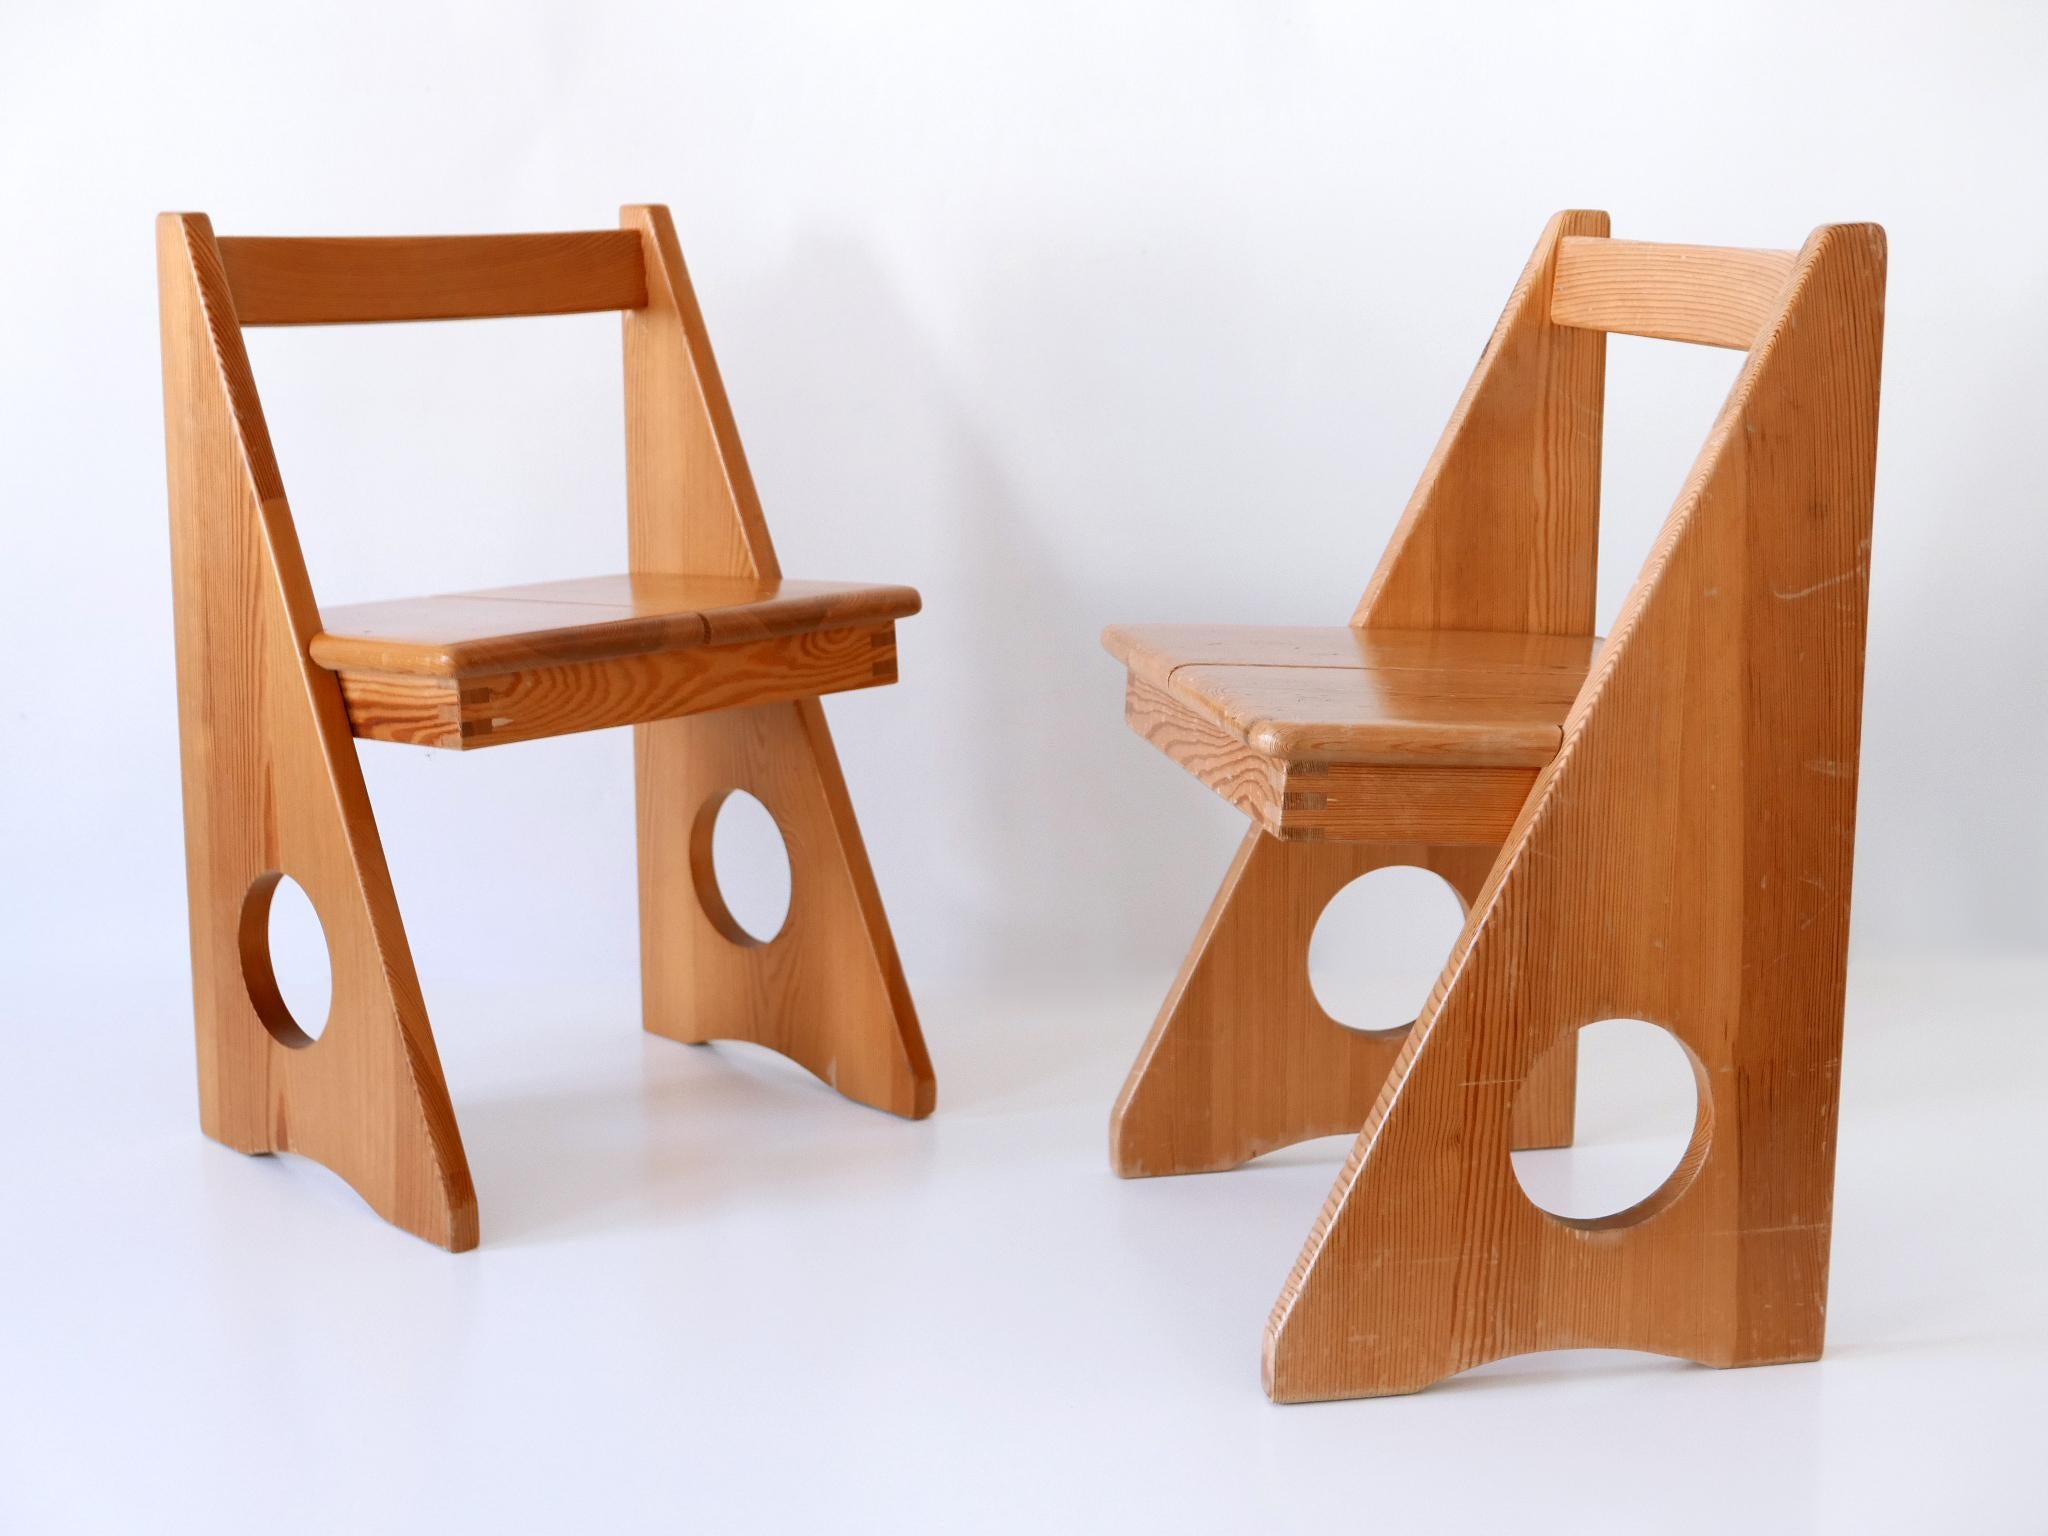 German Set of Two Children's Chairs by Gilbert Marklund for Furusnickarn Sweden, 1970s For Sale